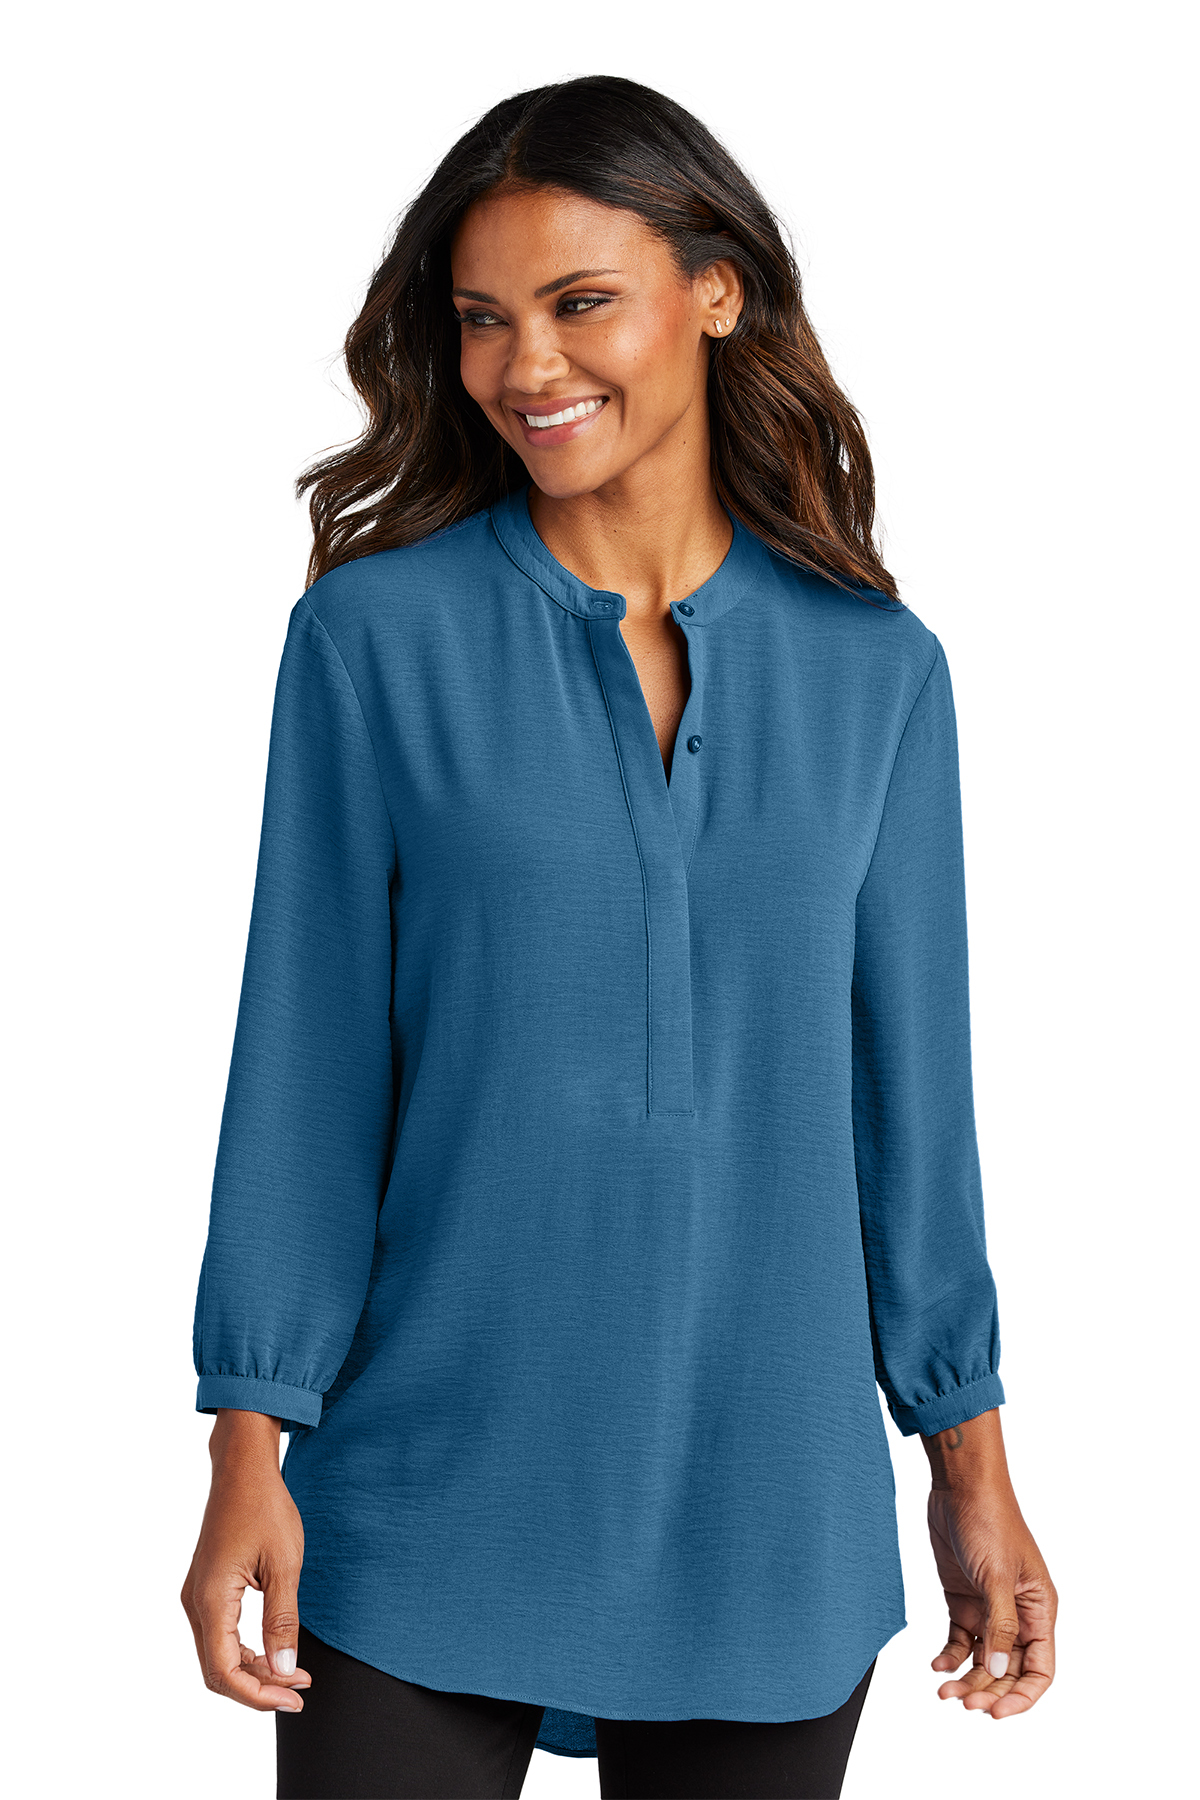 Lands' End Women's Tall Rayon 3/4 Sleeve V Neck Tunic Top - Medium Tall -  Wood Lily Tile Geo